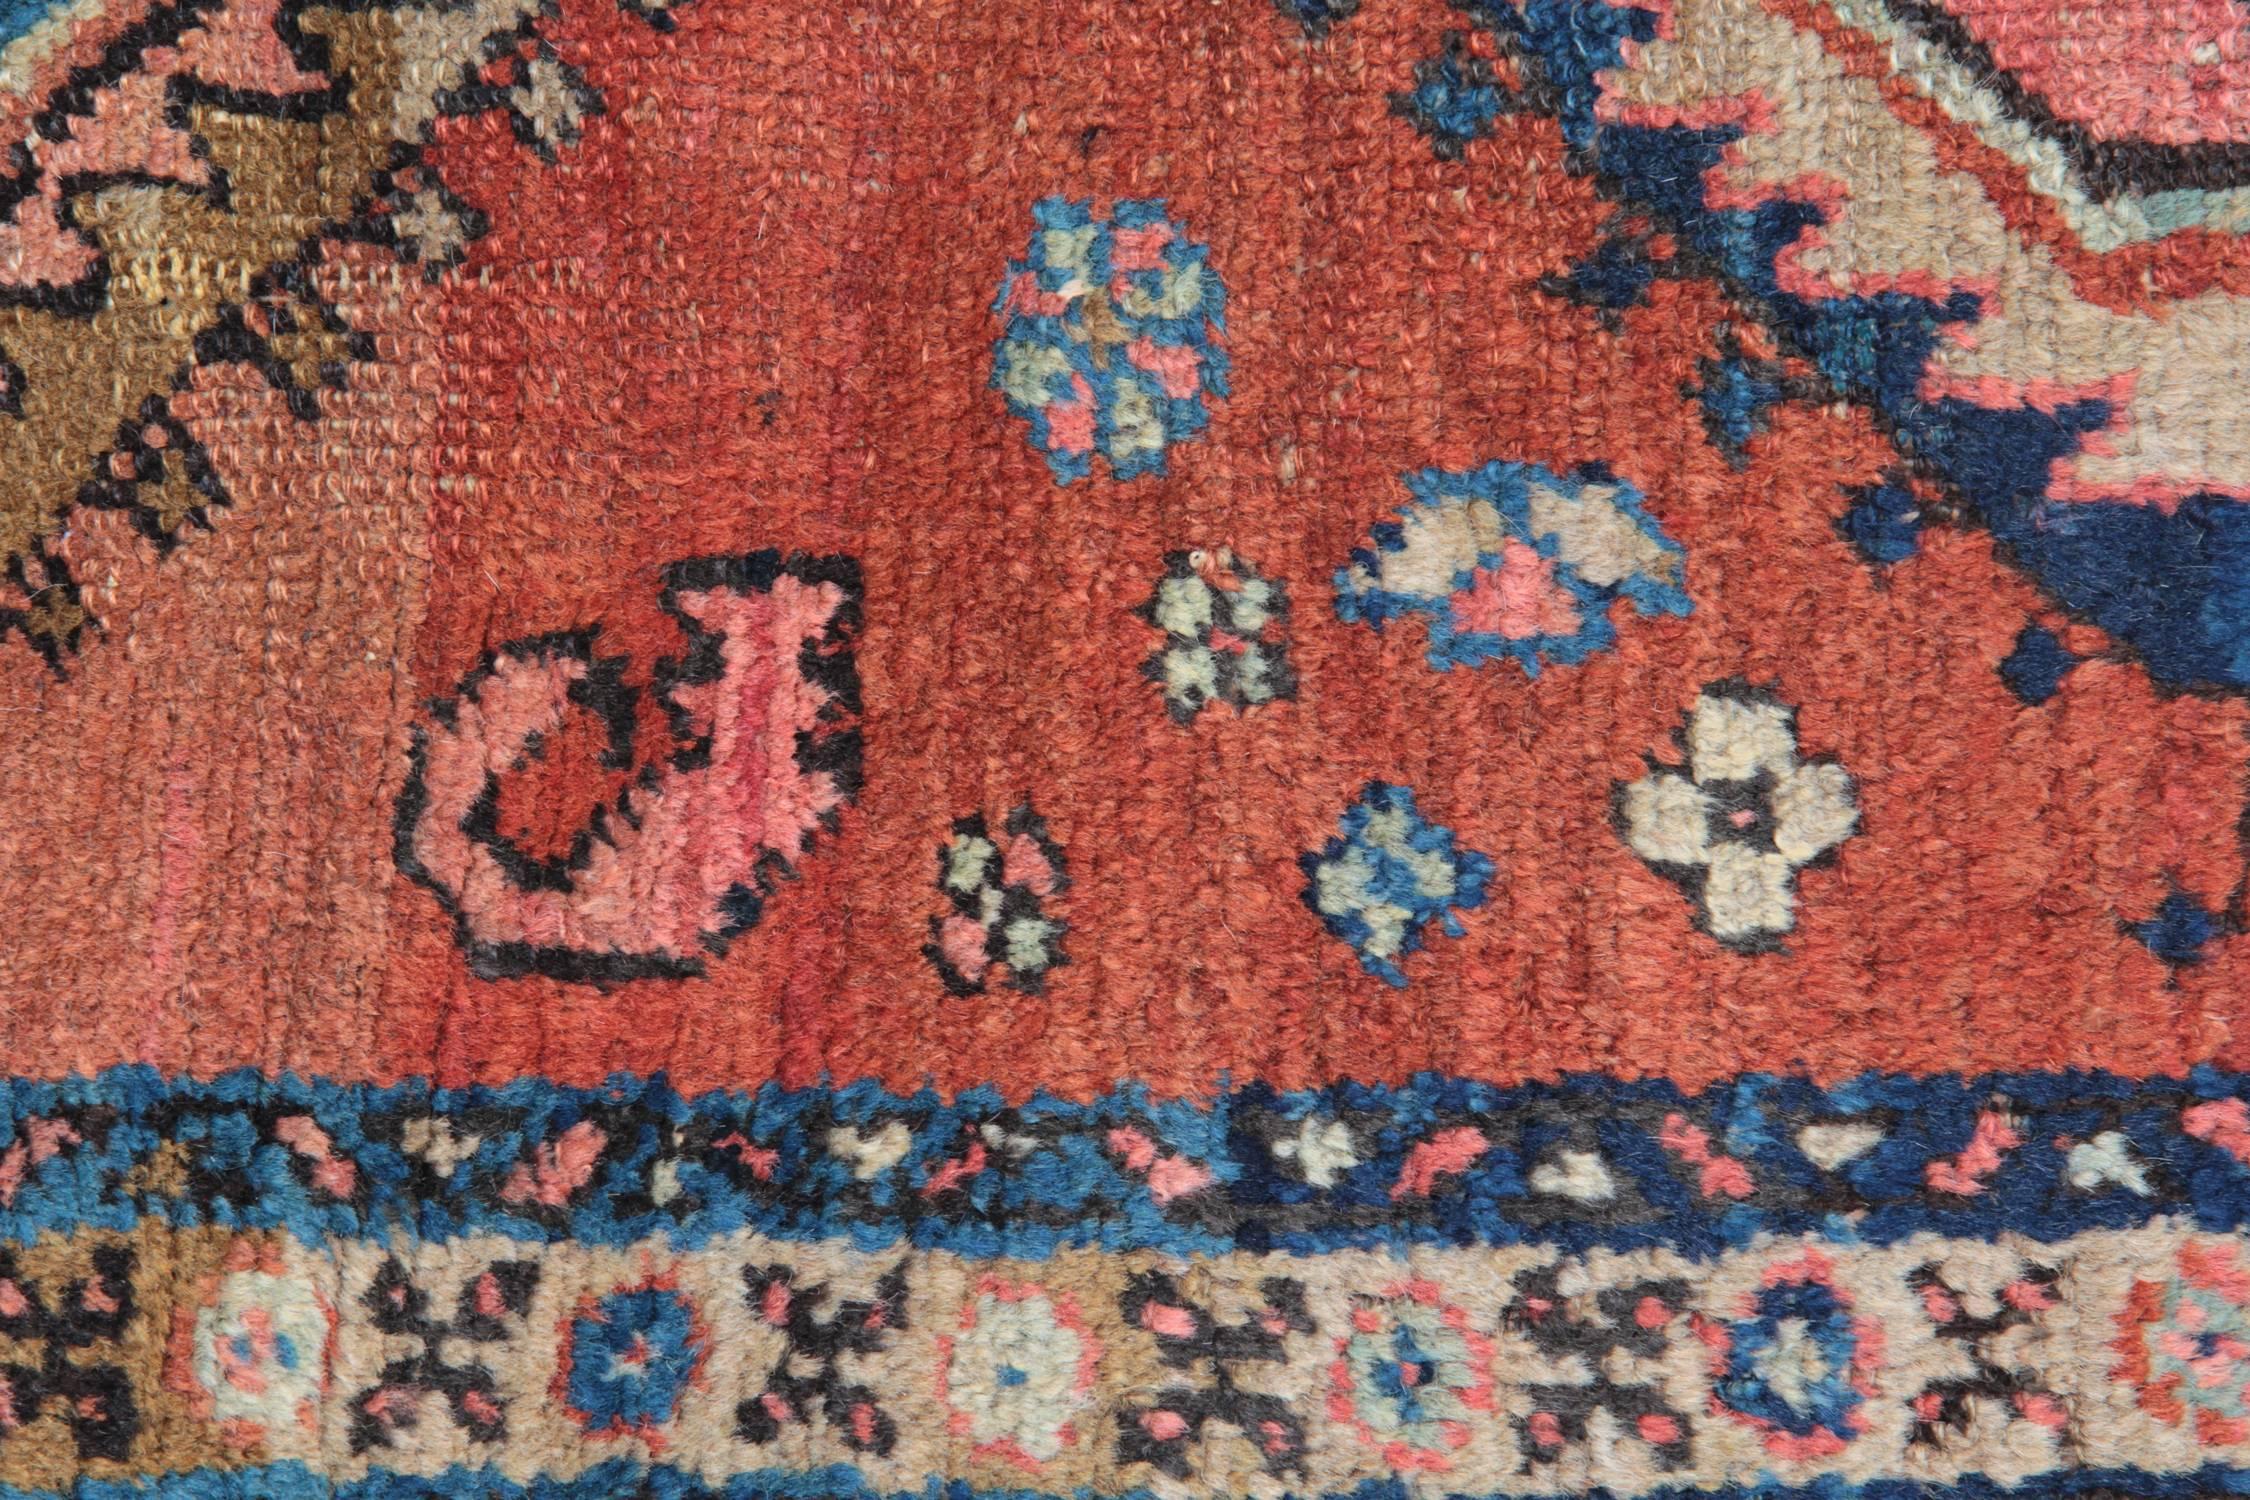 Early 20th Century Antique Carpet Runners, Persian Rugs and Runners from Heriz